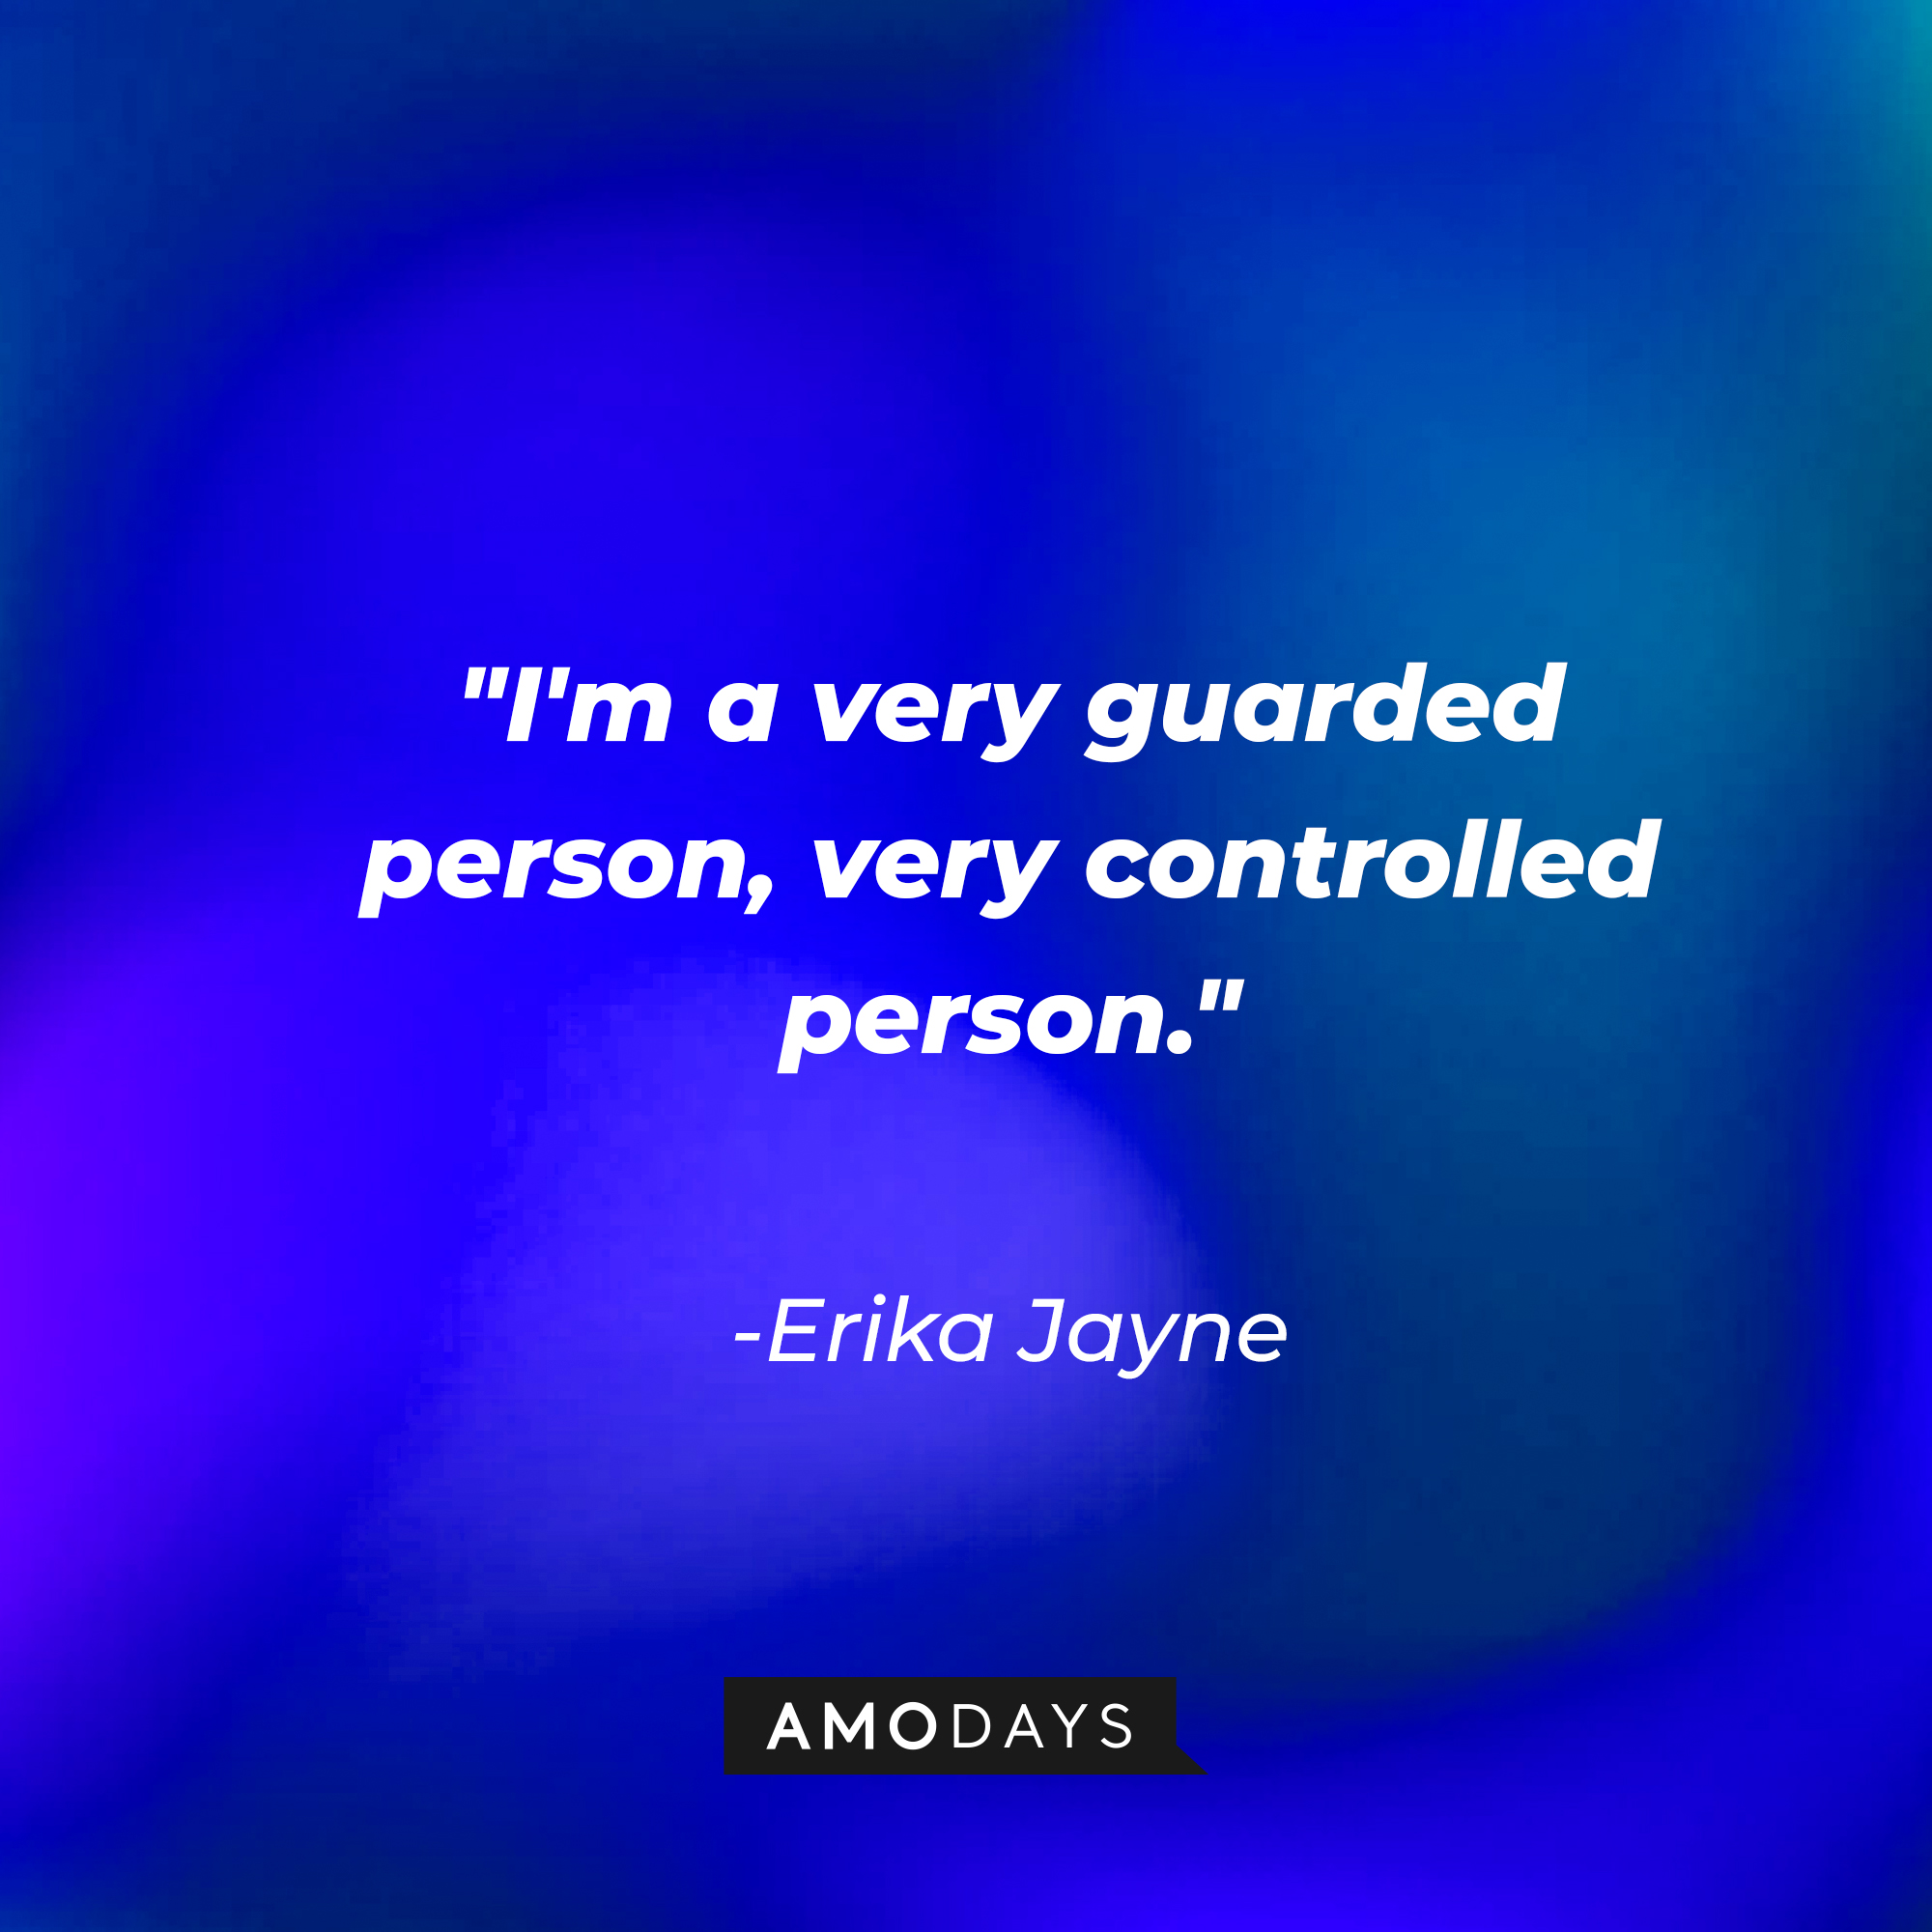 Erika Jayne’s quote: "I'm a very guarded person, very controlled person." | Image: Amodays